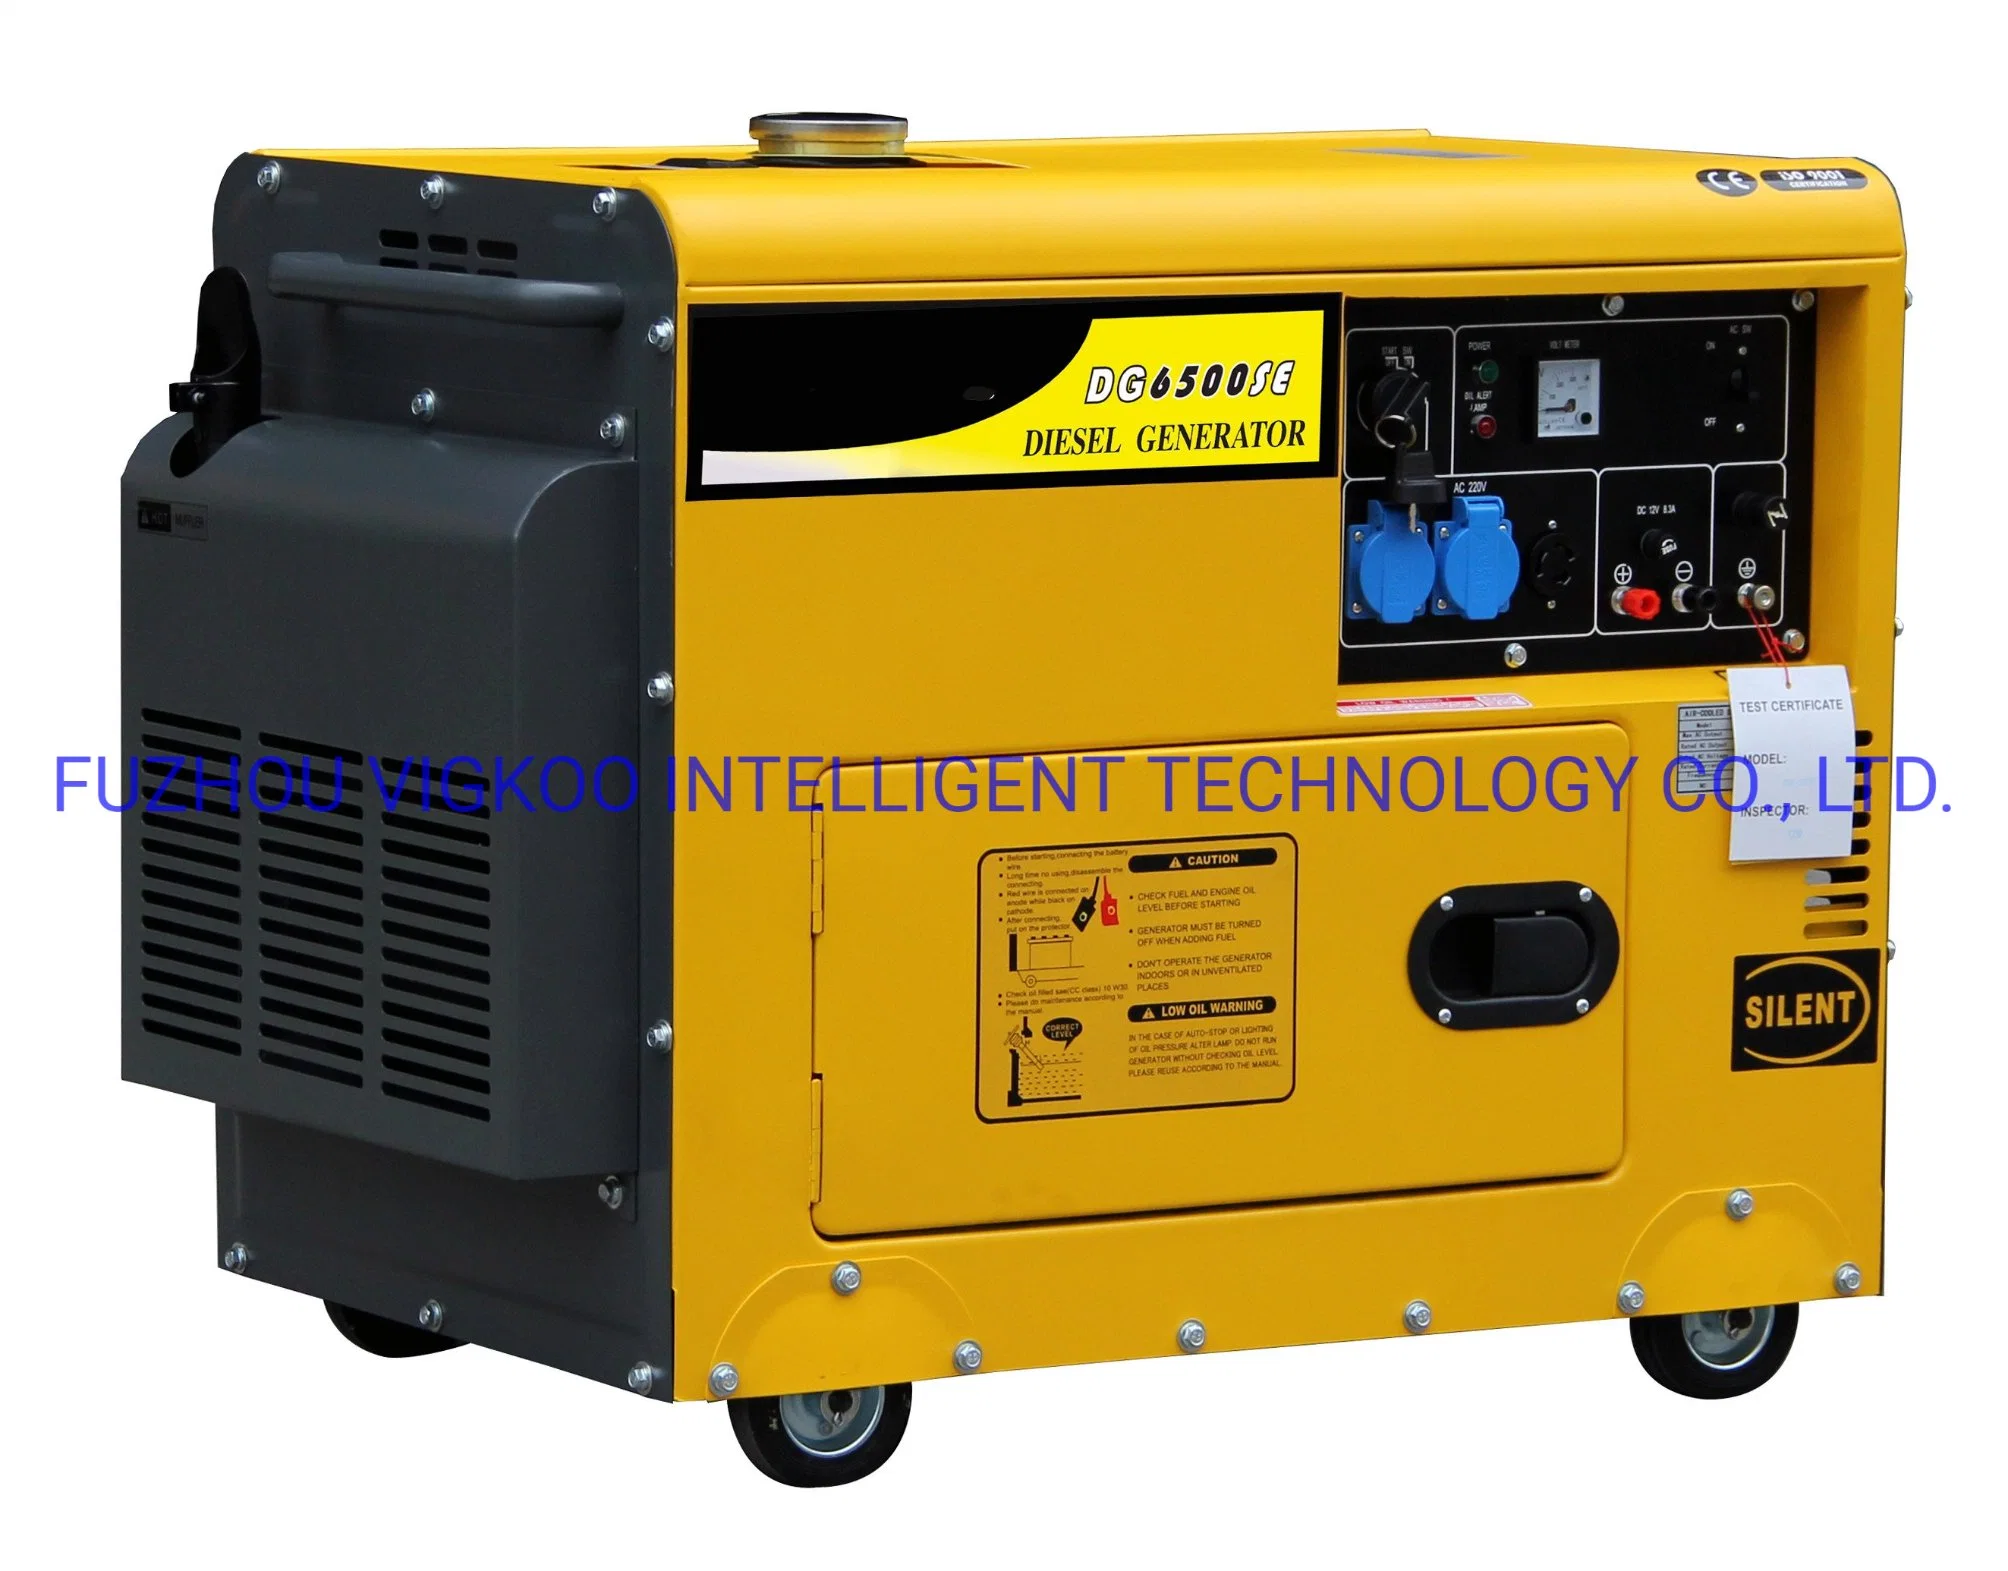 China Manufacturer 4.5/5.0kw Soundproof Air Cooled Silent Electric Start Diesel Portable Power Generator Set Dg6500se with CE and Euro V